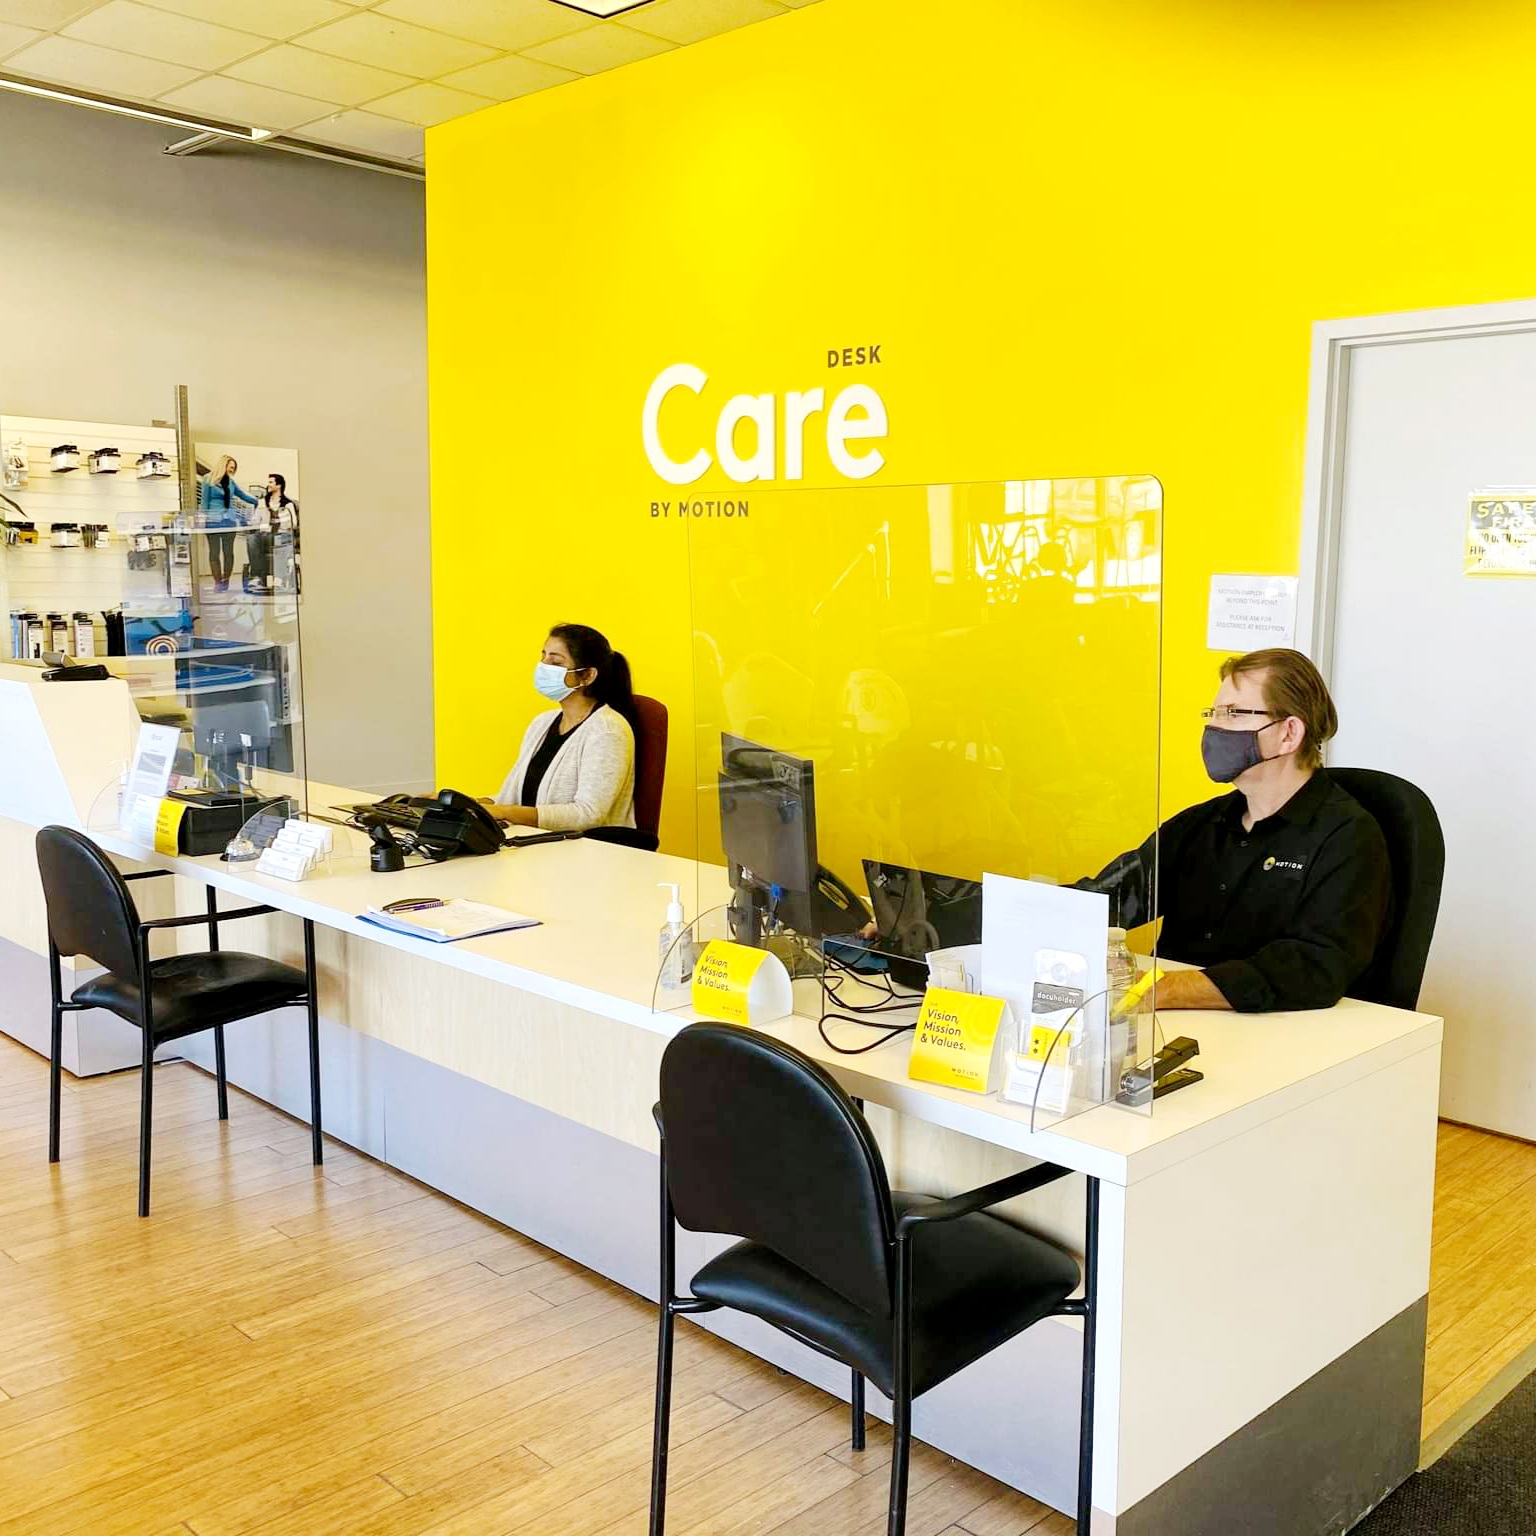 Mississauga care desk with team